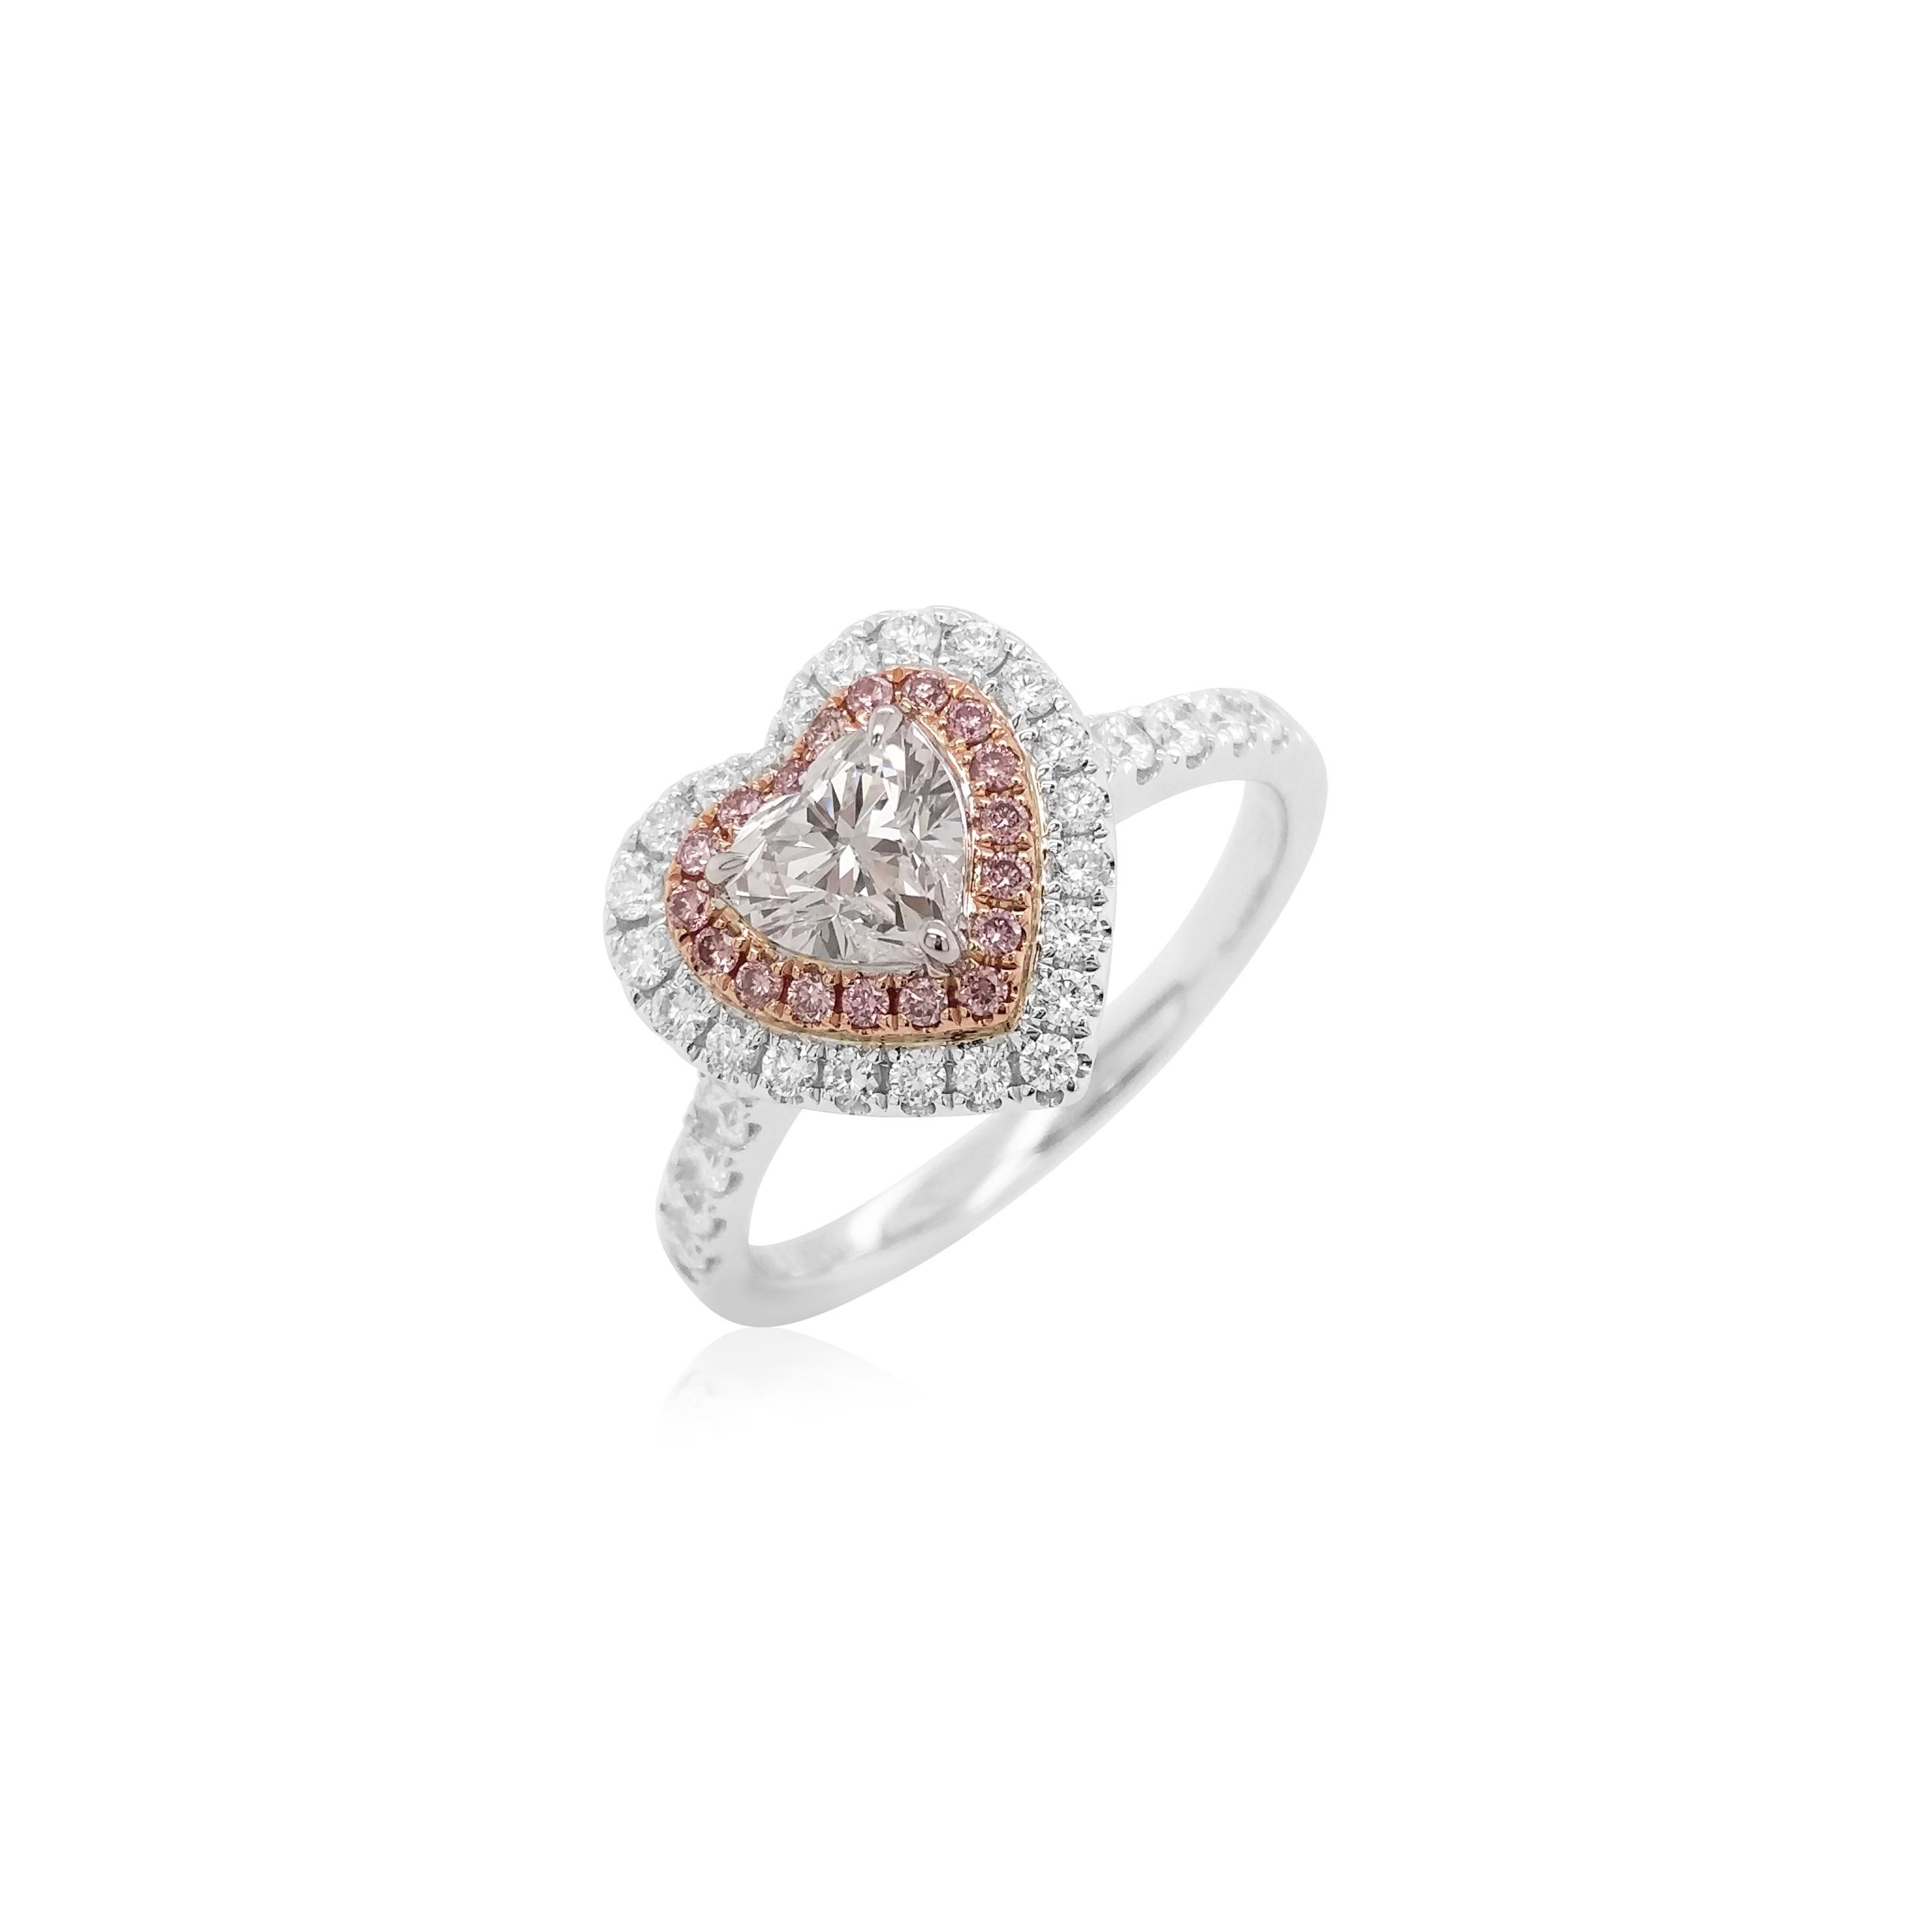 Heart Cut Heart Shape White and Pink Diamond Ring made in 18K Gold- Valentine Special  For Sale